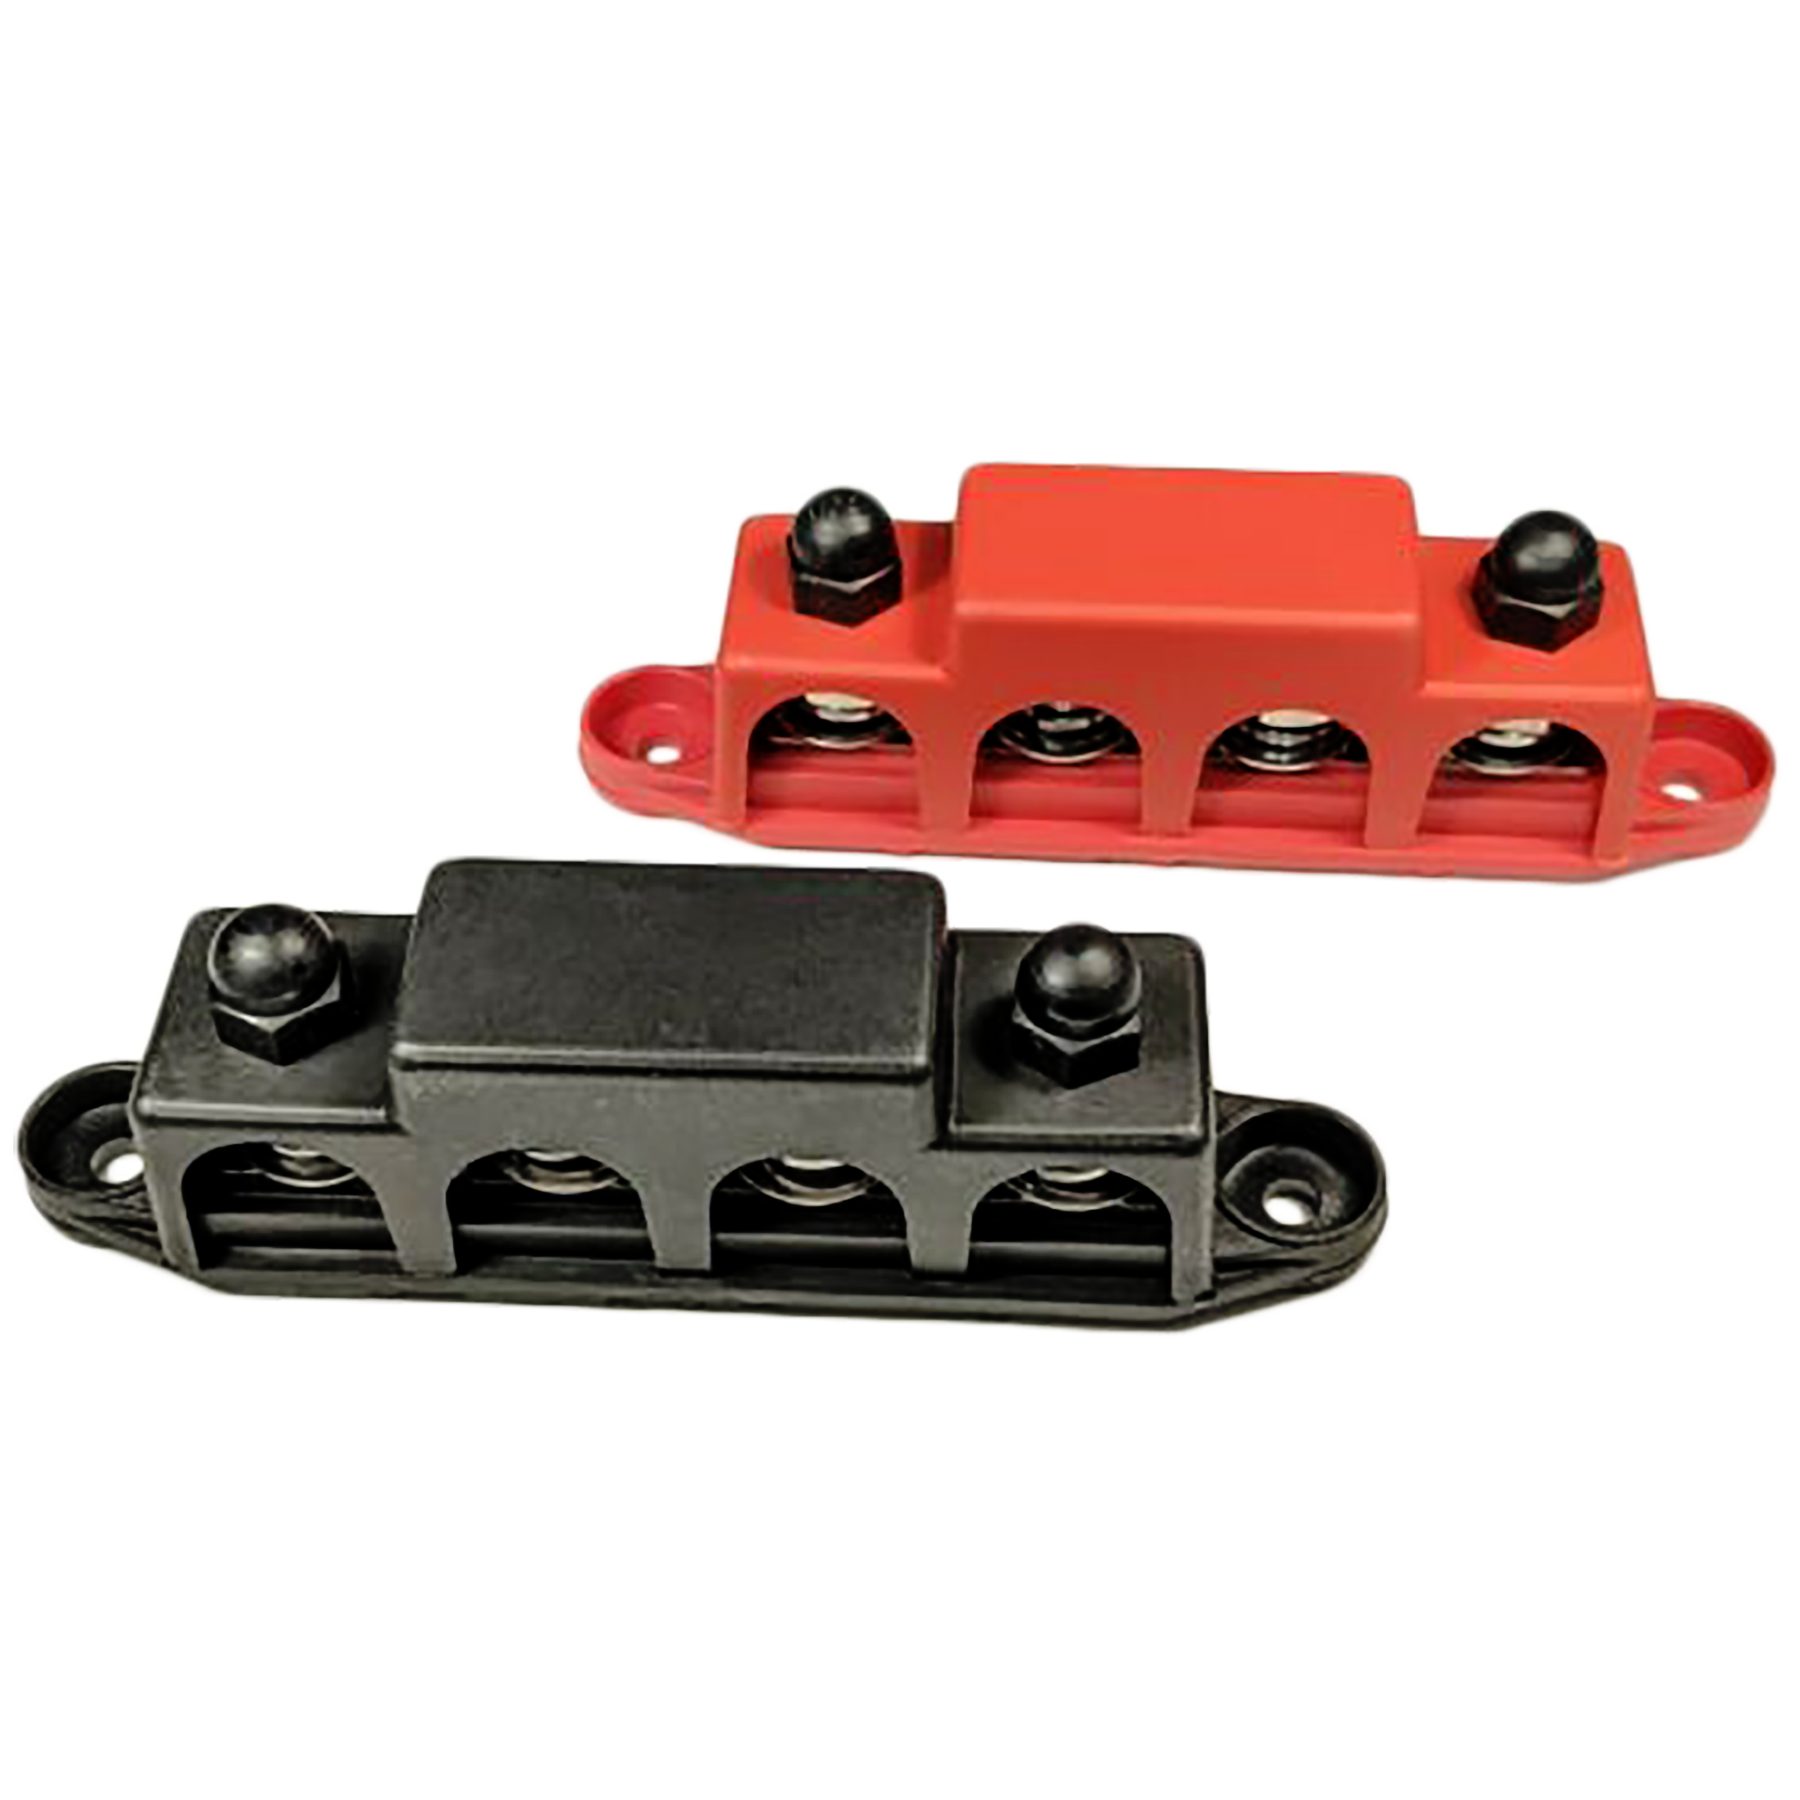 4 Post Busbar Bus Bar Power Distribution 12V 250A 3/8 in. Red and